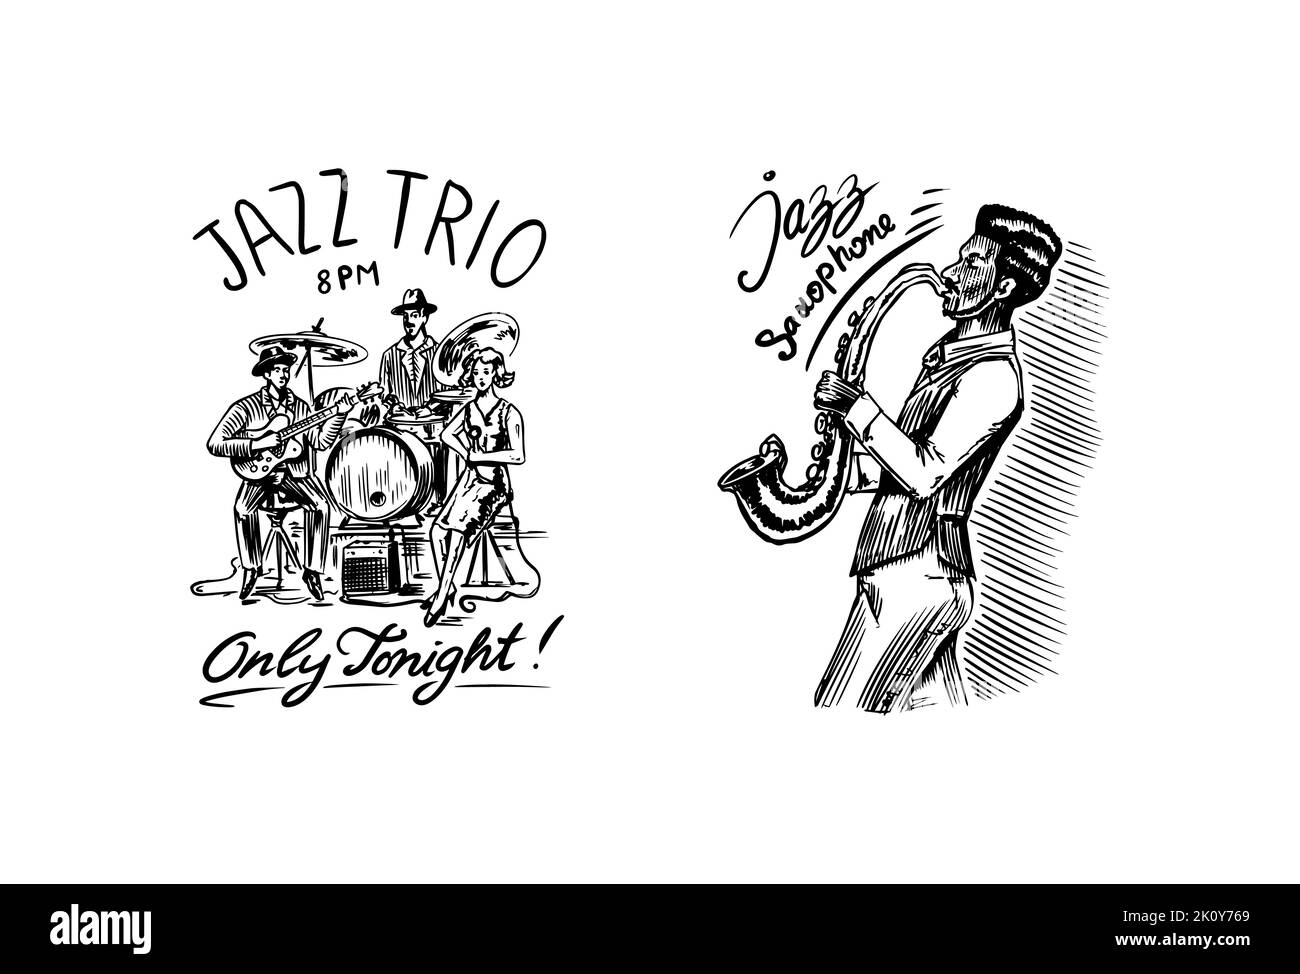 Jazz band. Singer with microphone, guitarist and drummer. Afro American saxophonist. The trio play instruments. Hand drawn logo or badge. Sketch Stock Vector